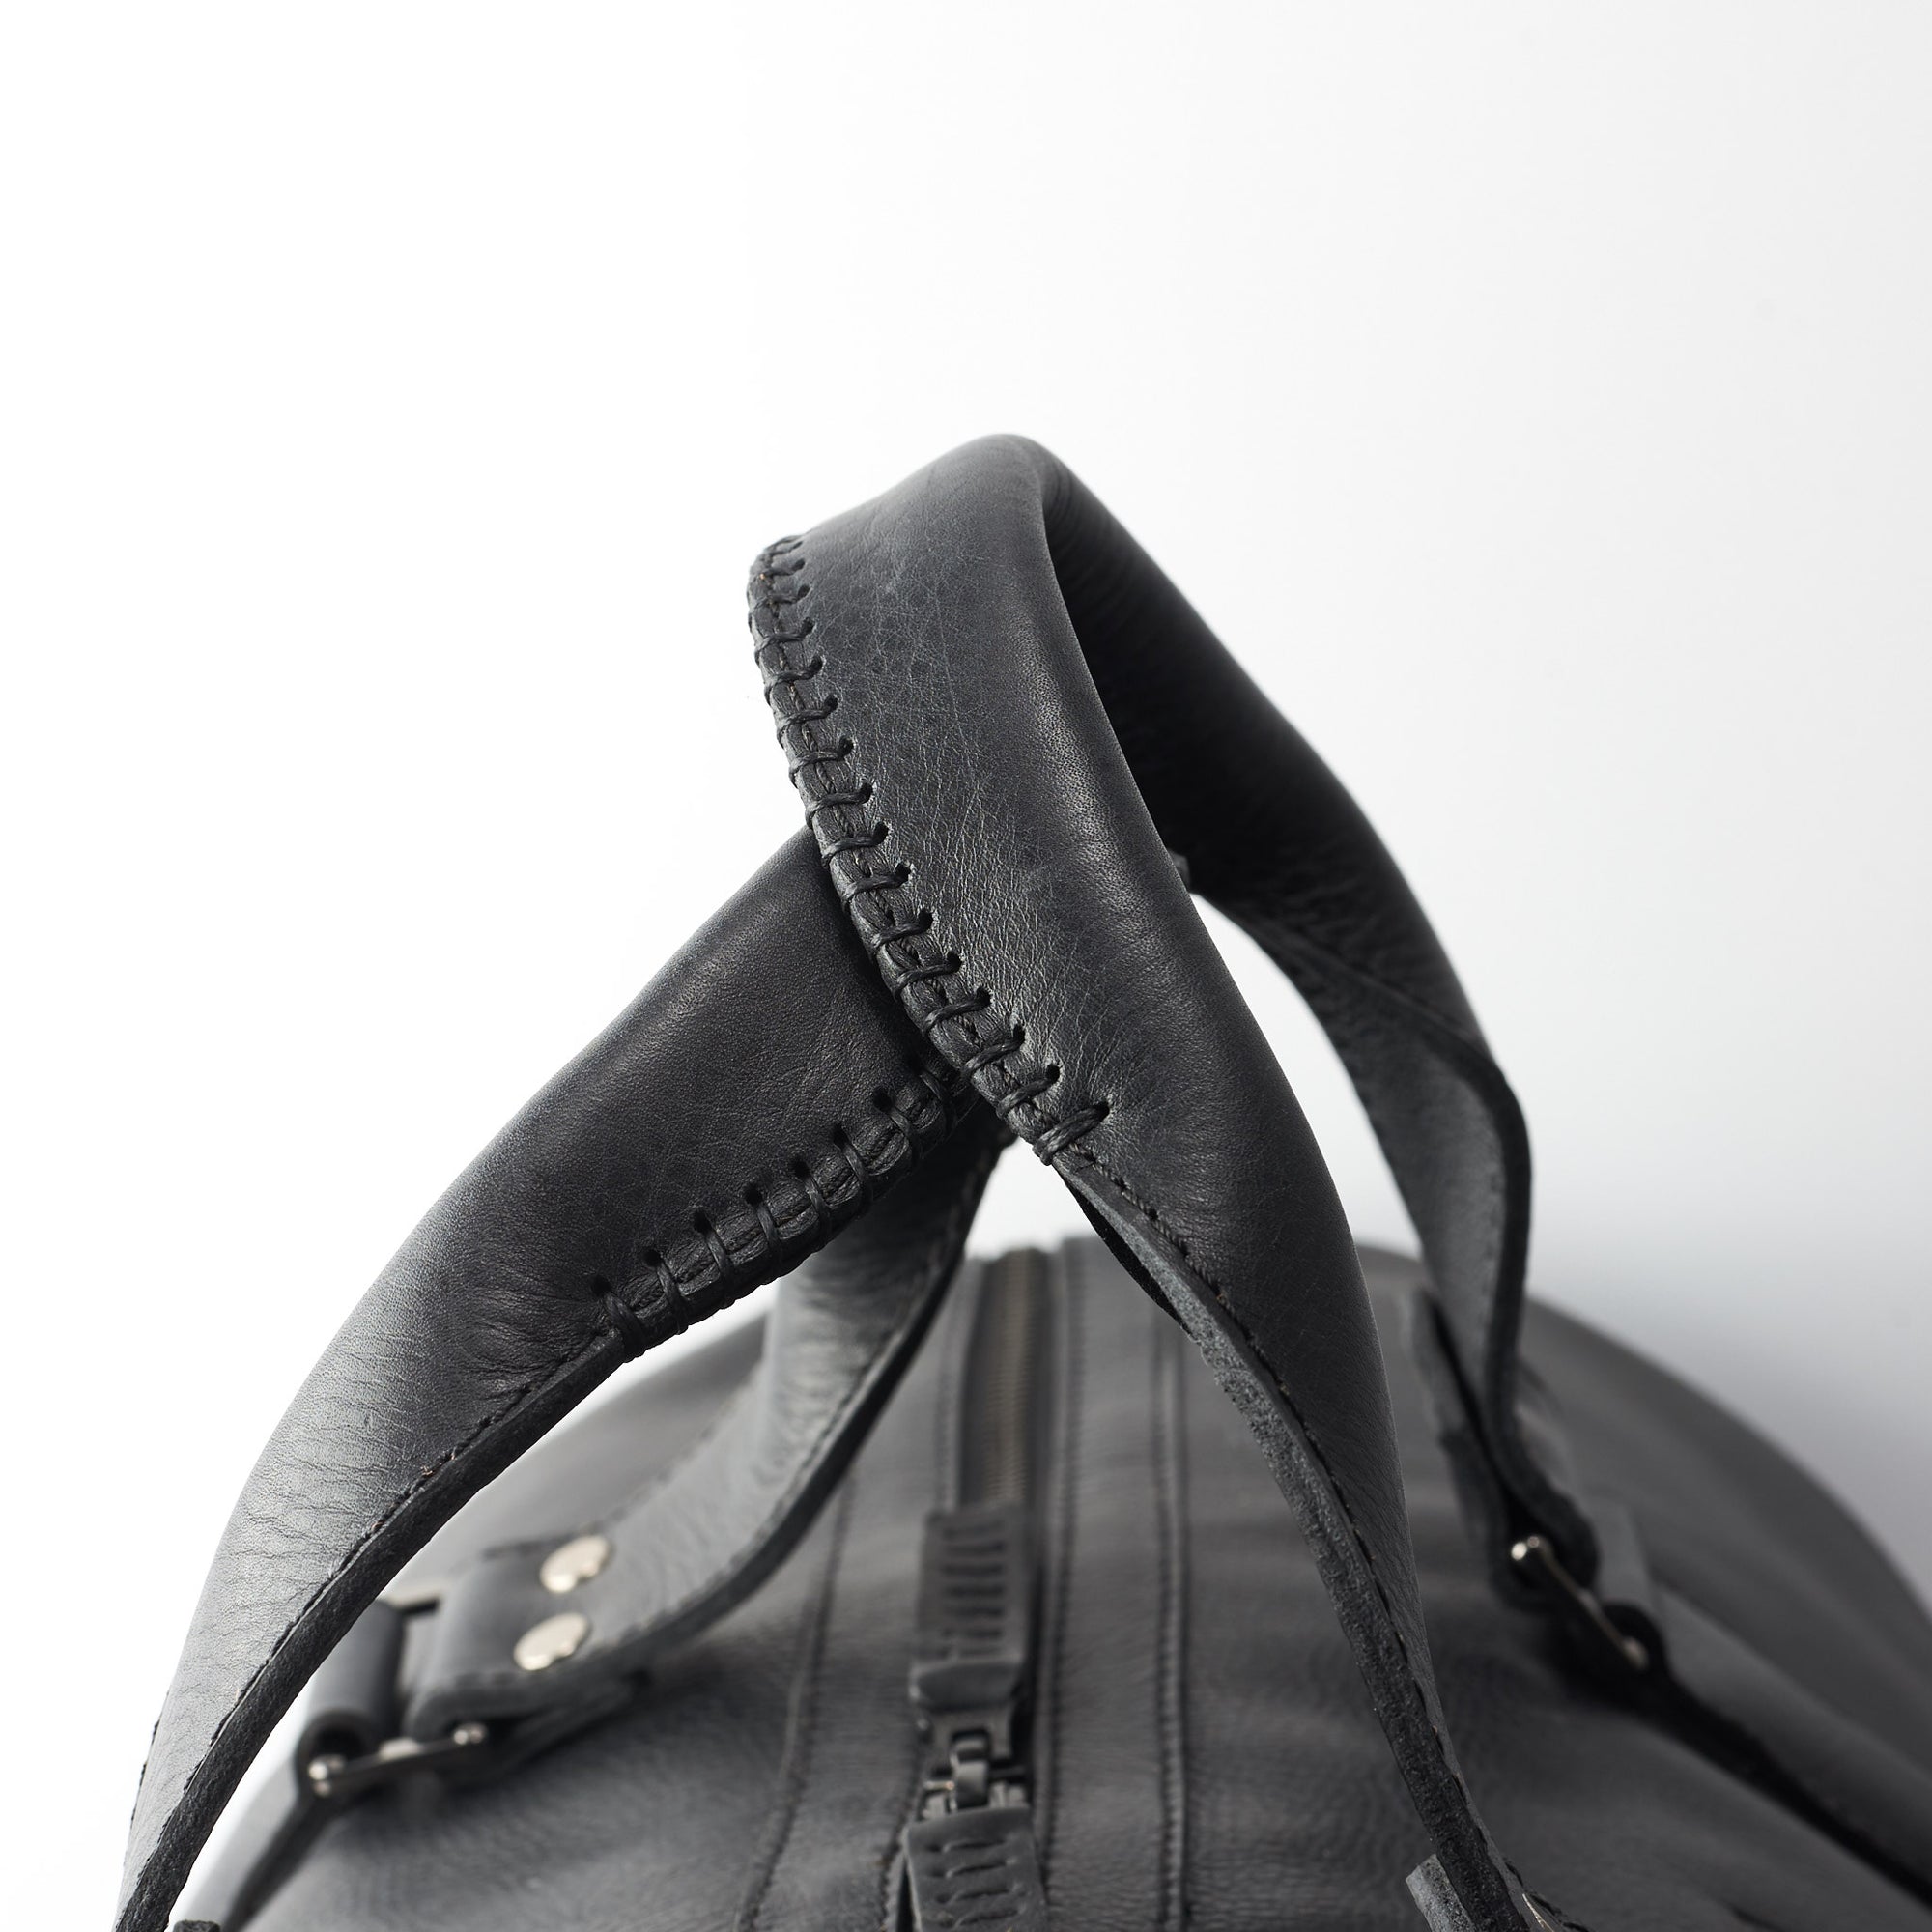 Hand stitched handles. Black leather athletic duffle bag for weekend